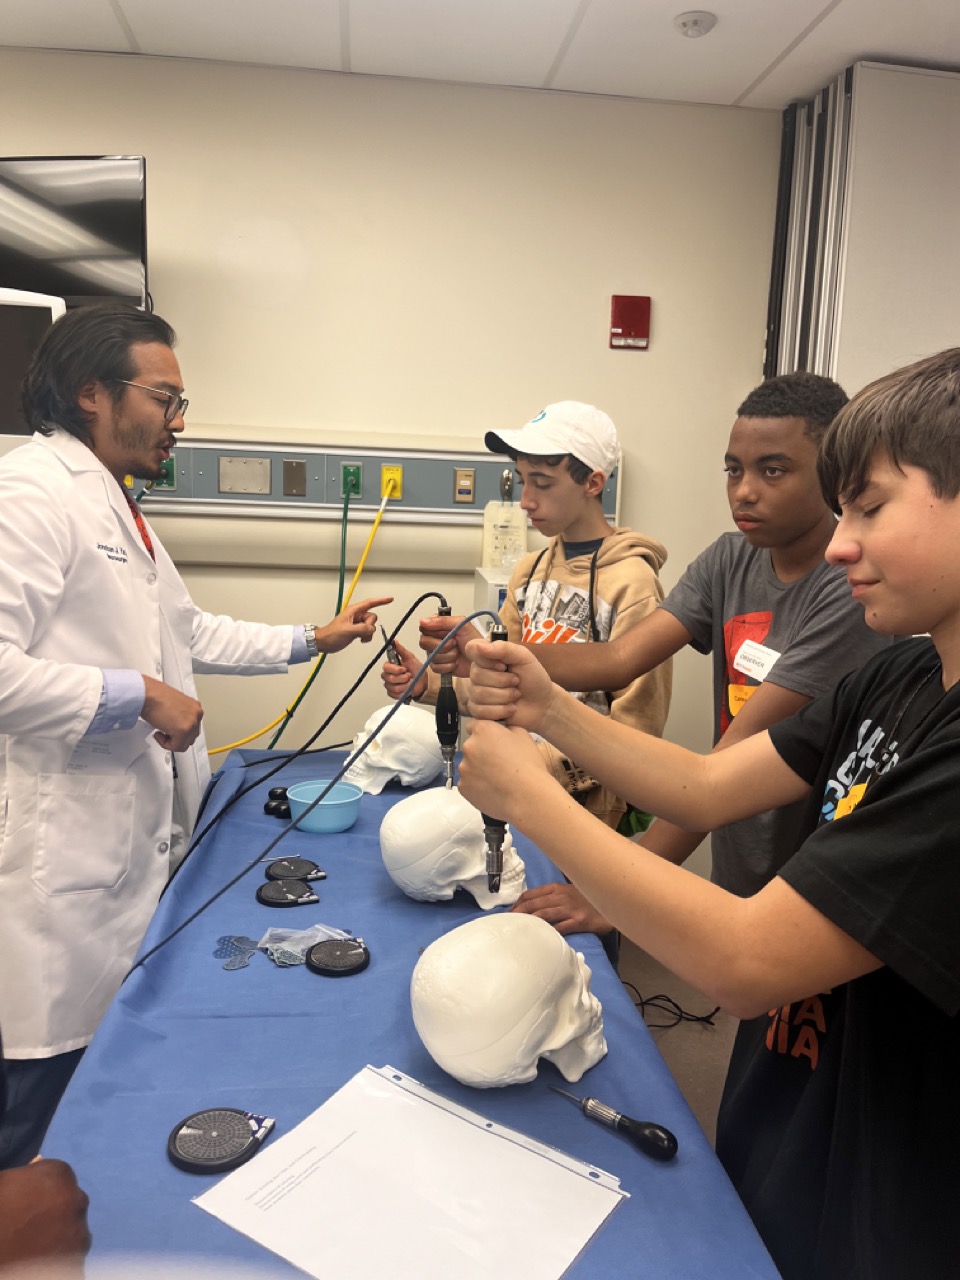 SHP Scholars explore a model human skull during the Health & Sciences Pathway with UVA Health.